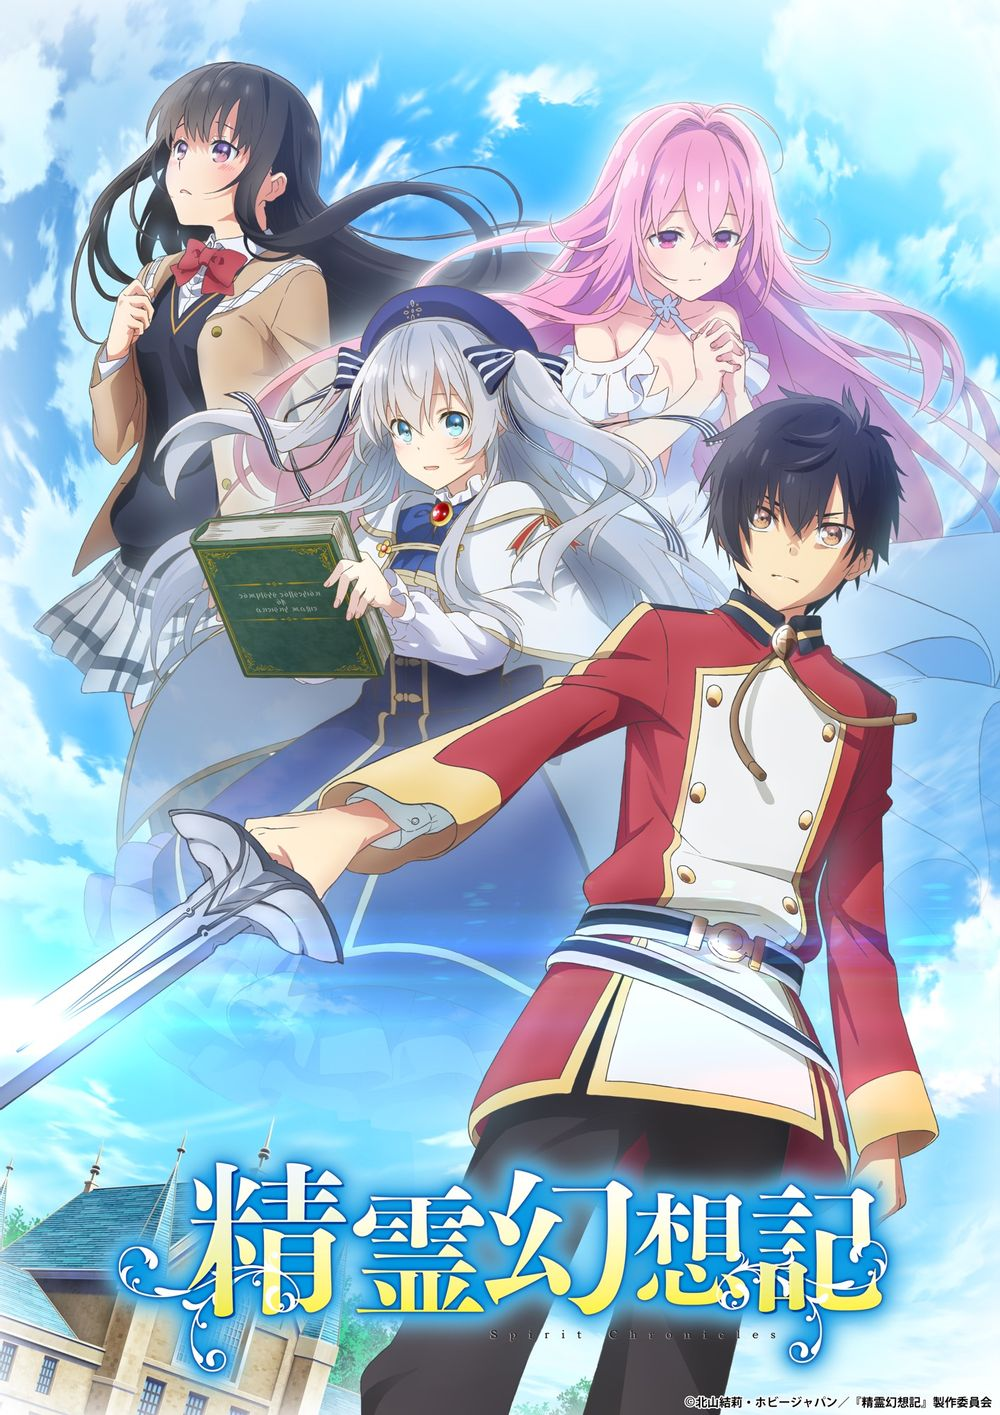 All Isekai Anime That Aired in 2021 - Anime Corner